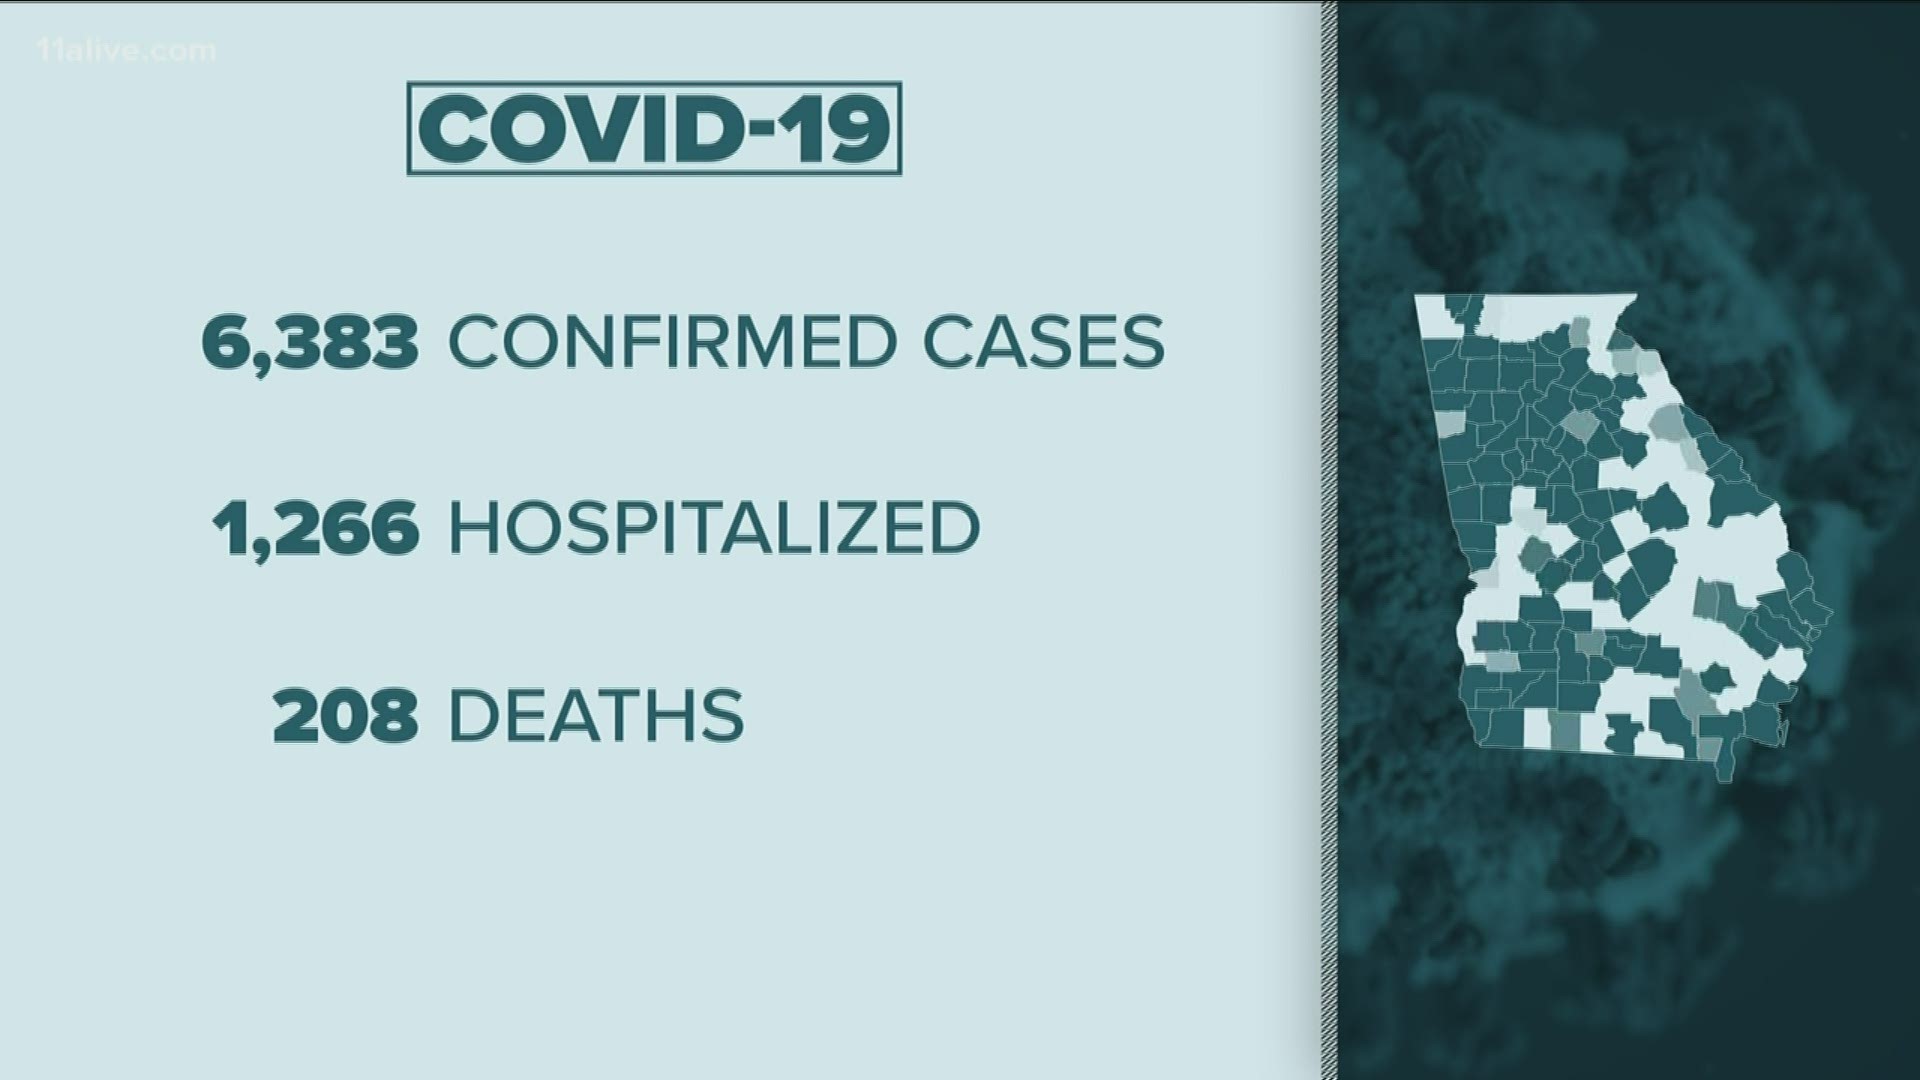 There are nearly 6,400 confirmed cases as of the 7 p.m. update on April 4. There have also been 1,266 hospitalizations and 208 deaths.